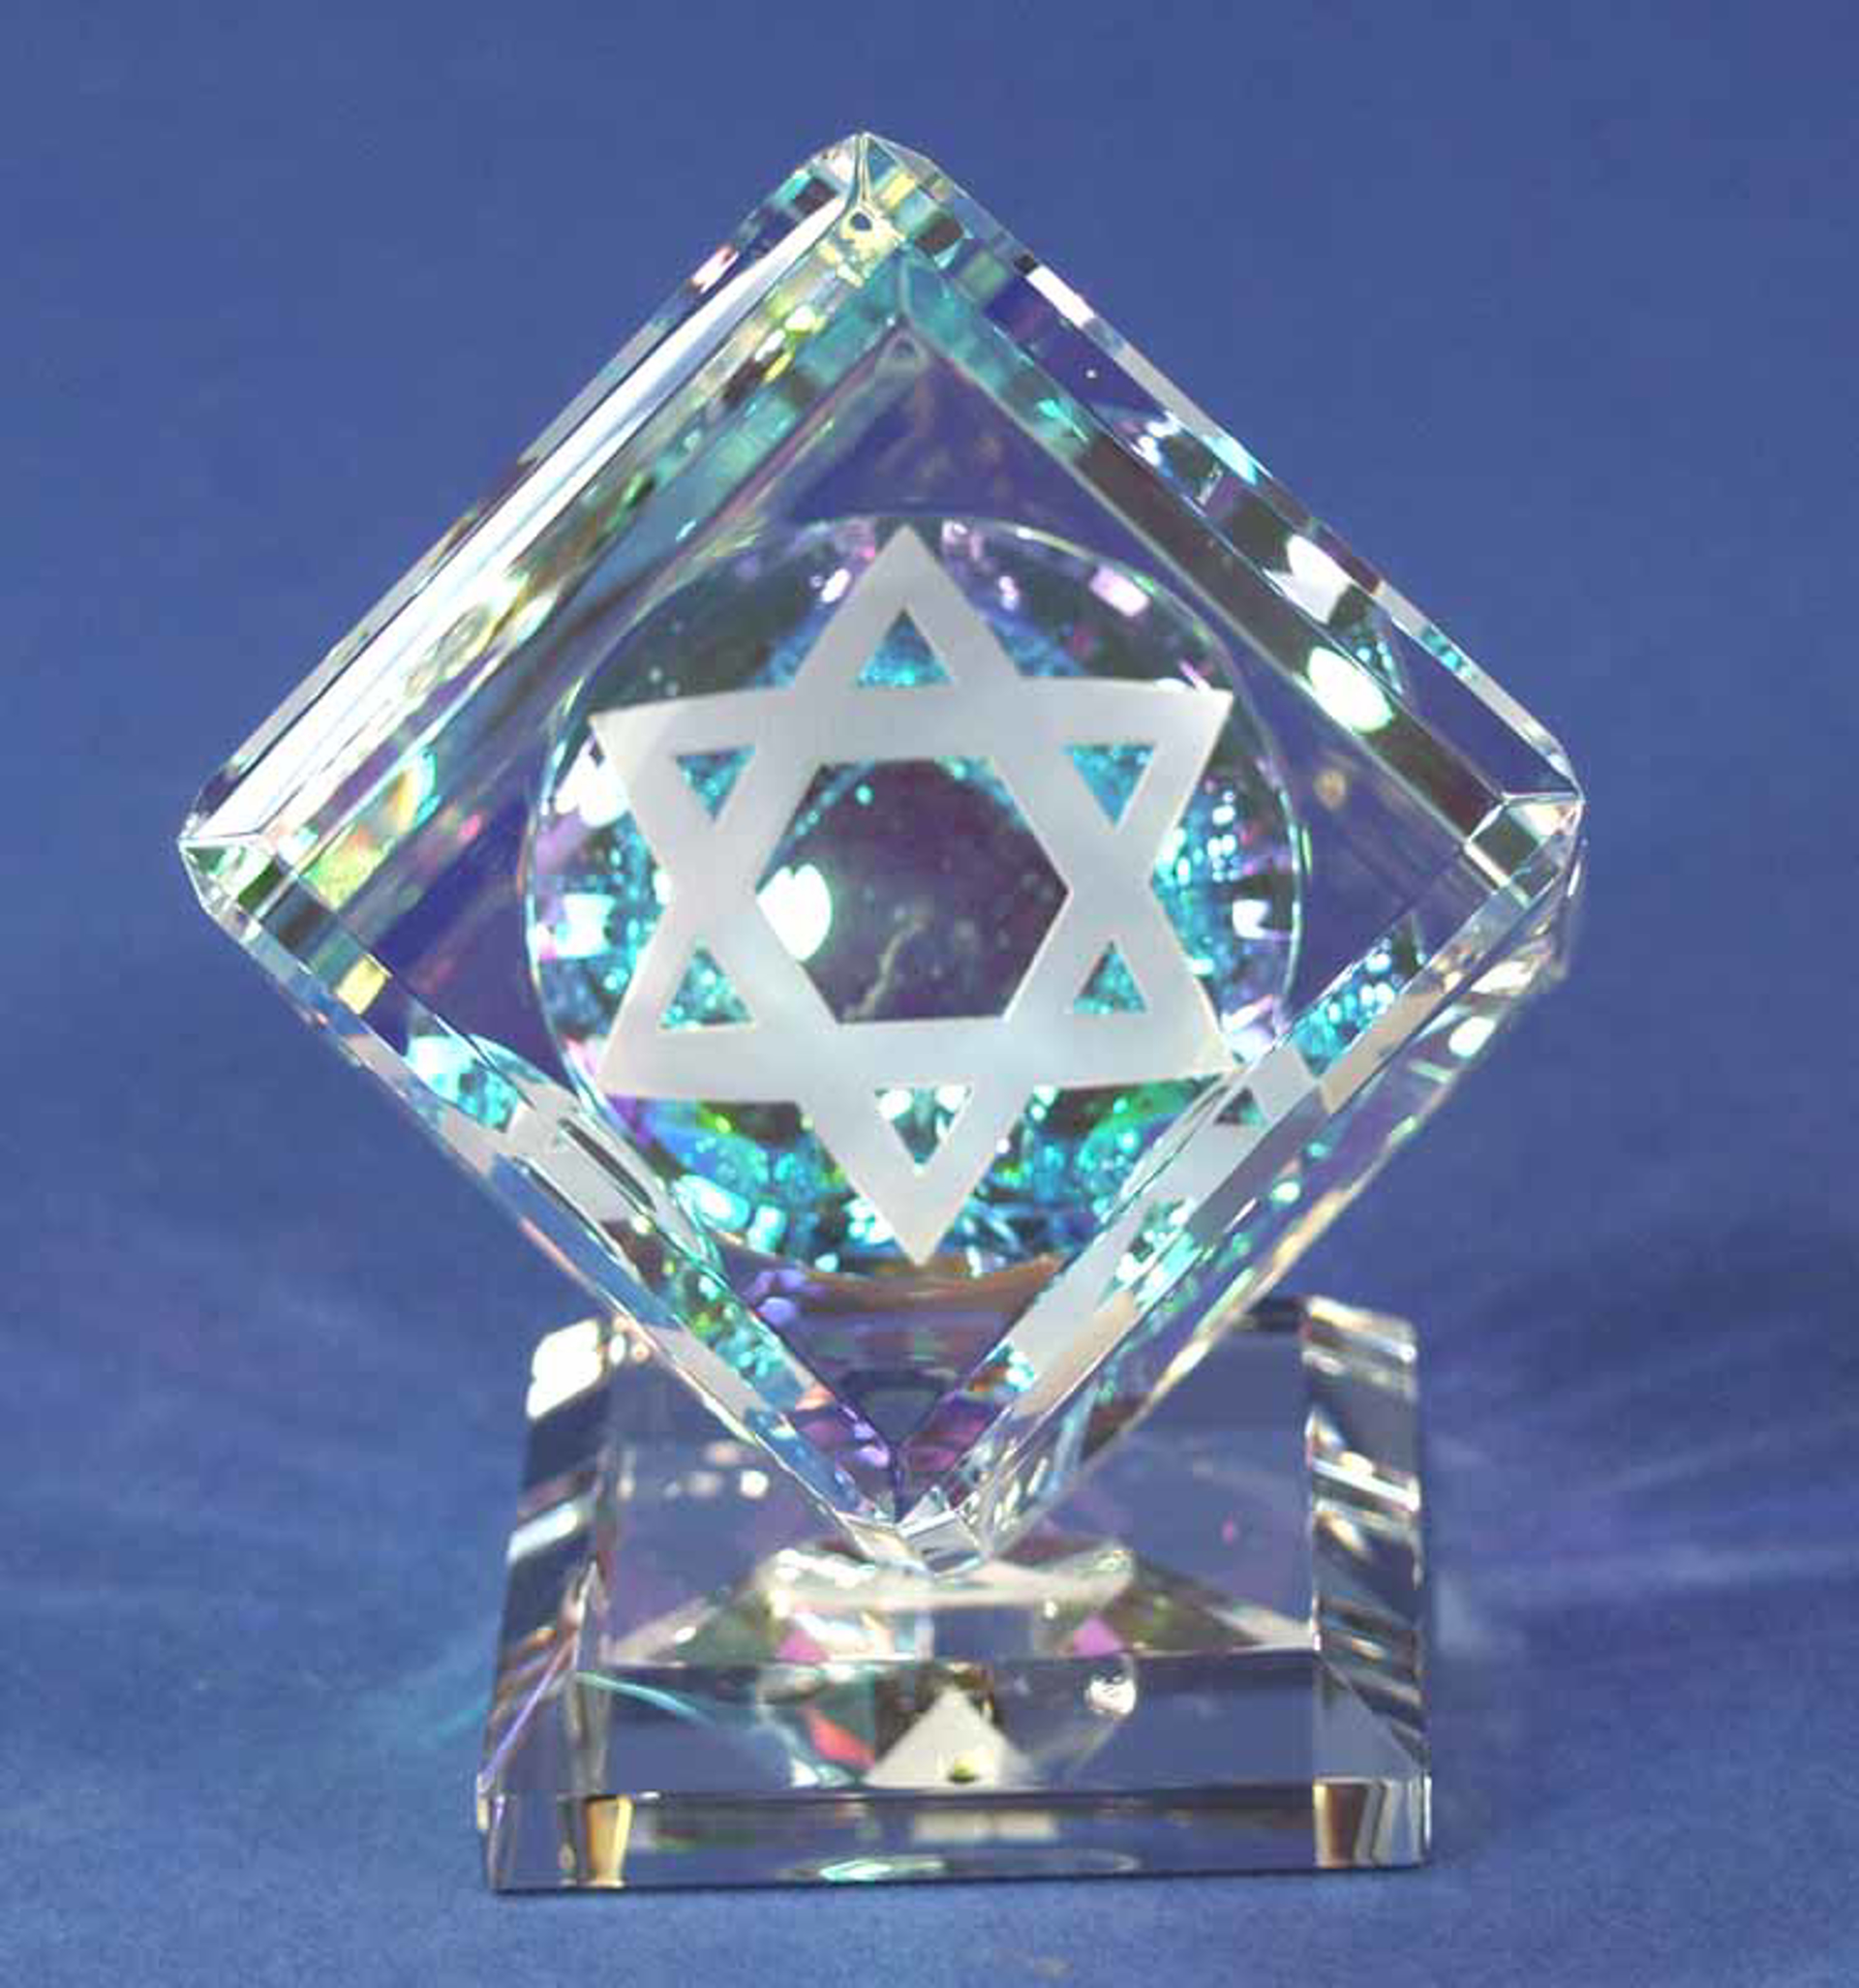 Crystal Cube 060mm (2 3/8") with Star of David on Base by Harold Lustig